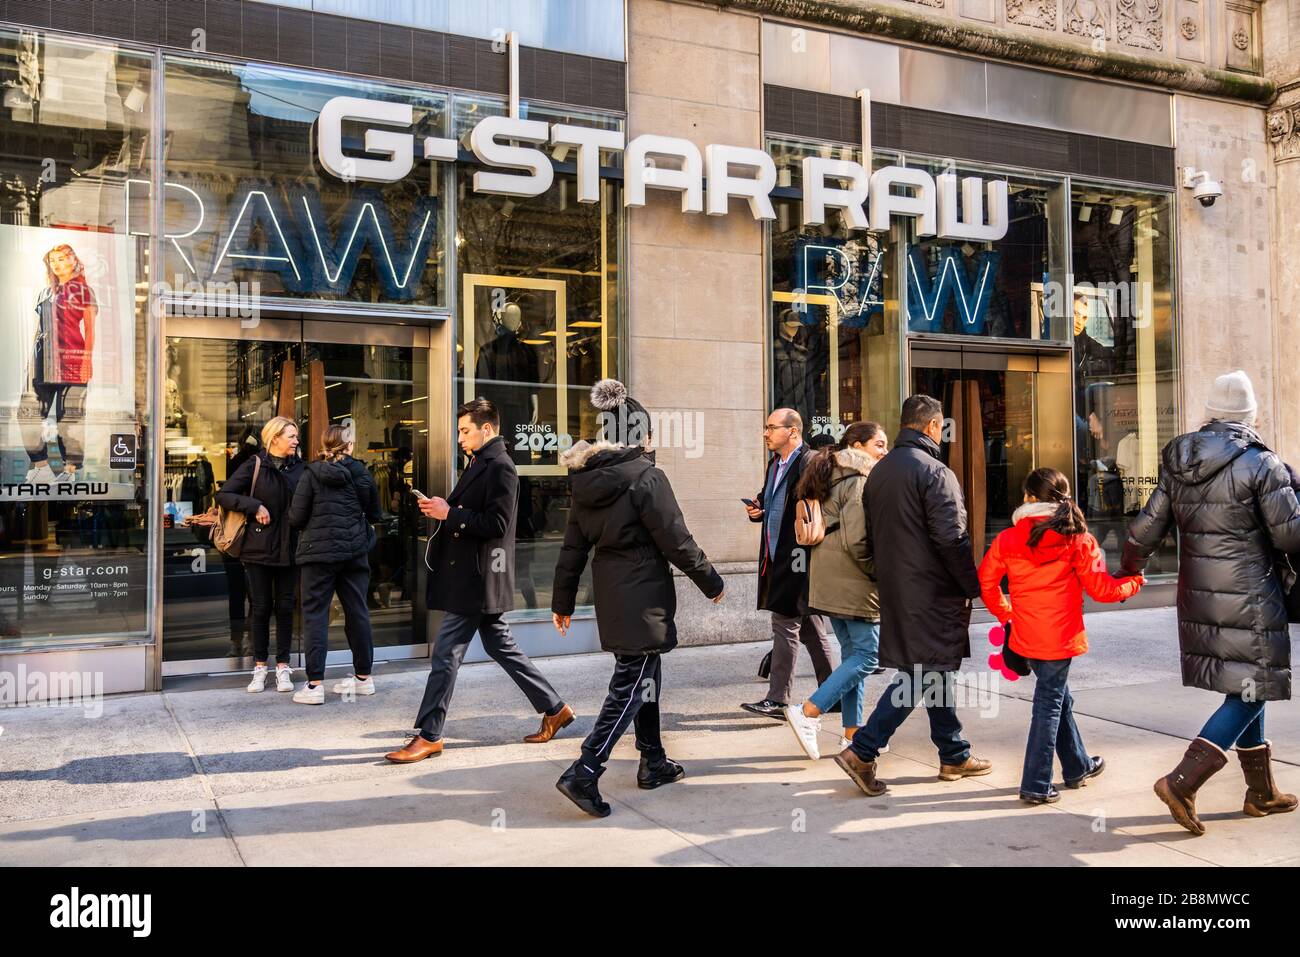 G Star Raw High Resolution Stock Photography and Images - Alamy